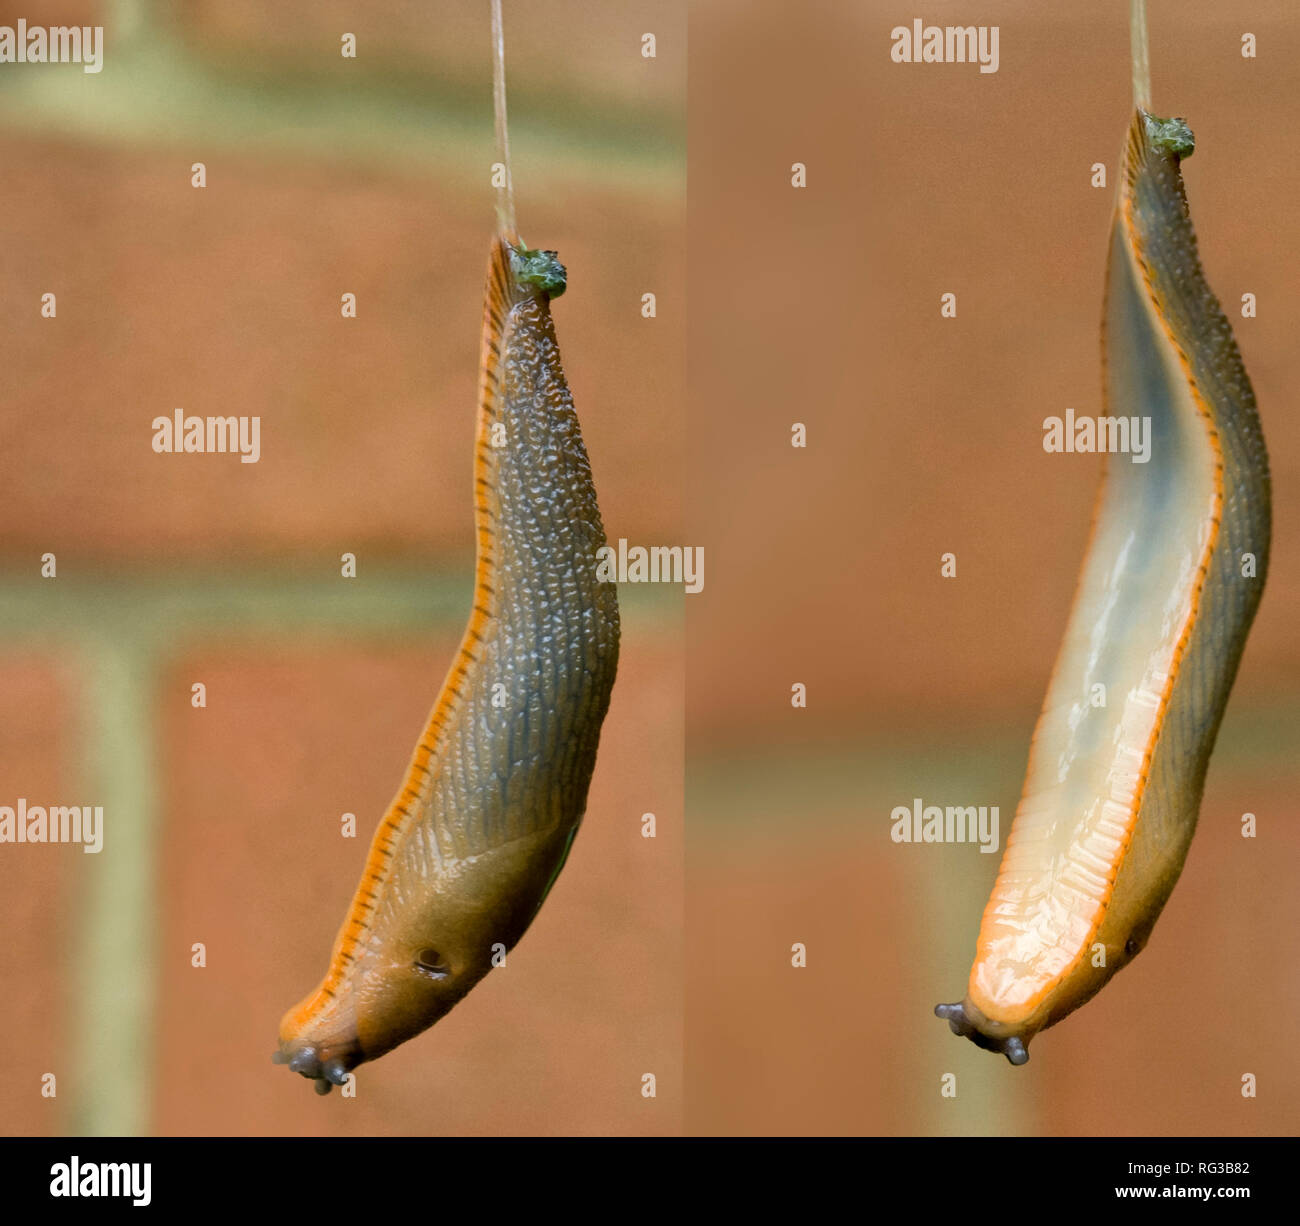 Large red slug (Arion ater) hanging from a slime cord produced by the terrestrial mollusc. Lowering itself from a hanging basket and twisting around. Stock Photo